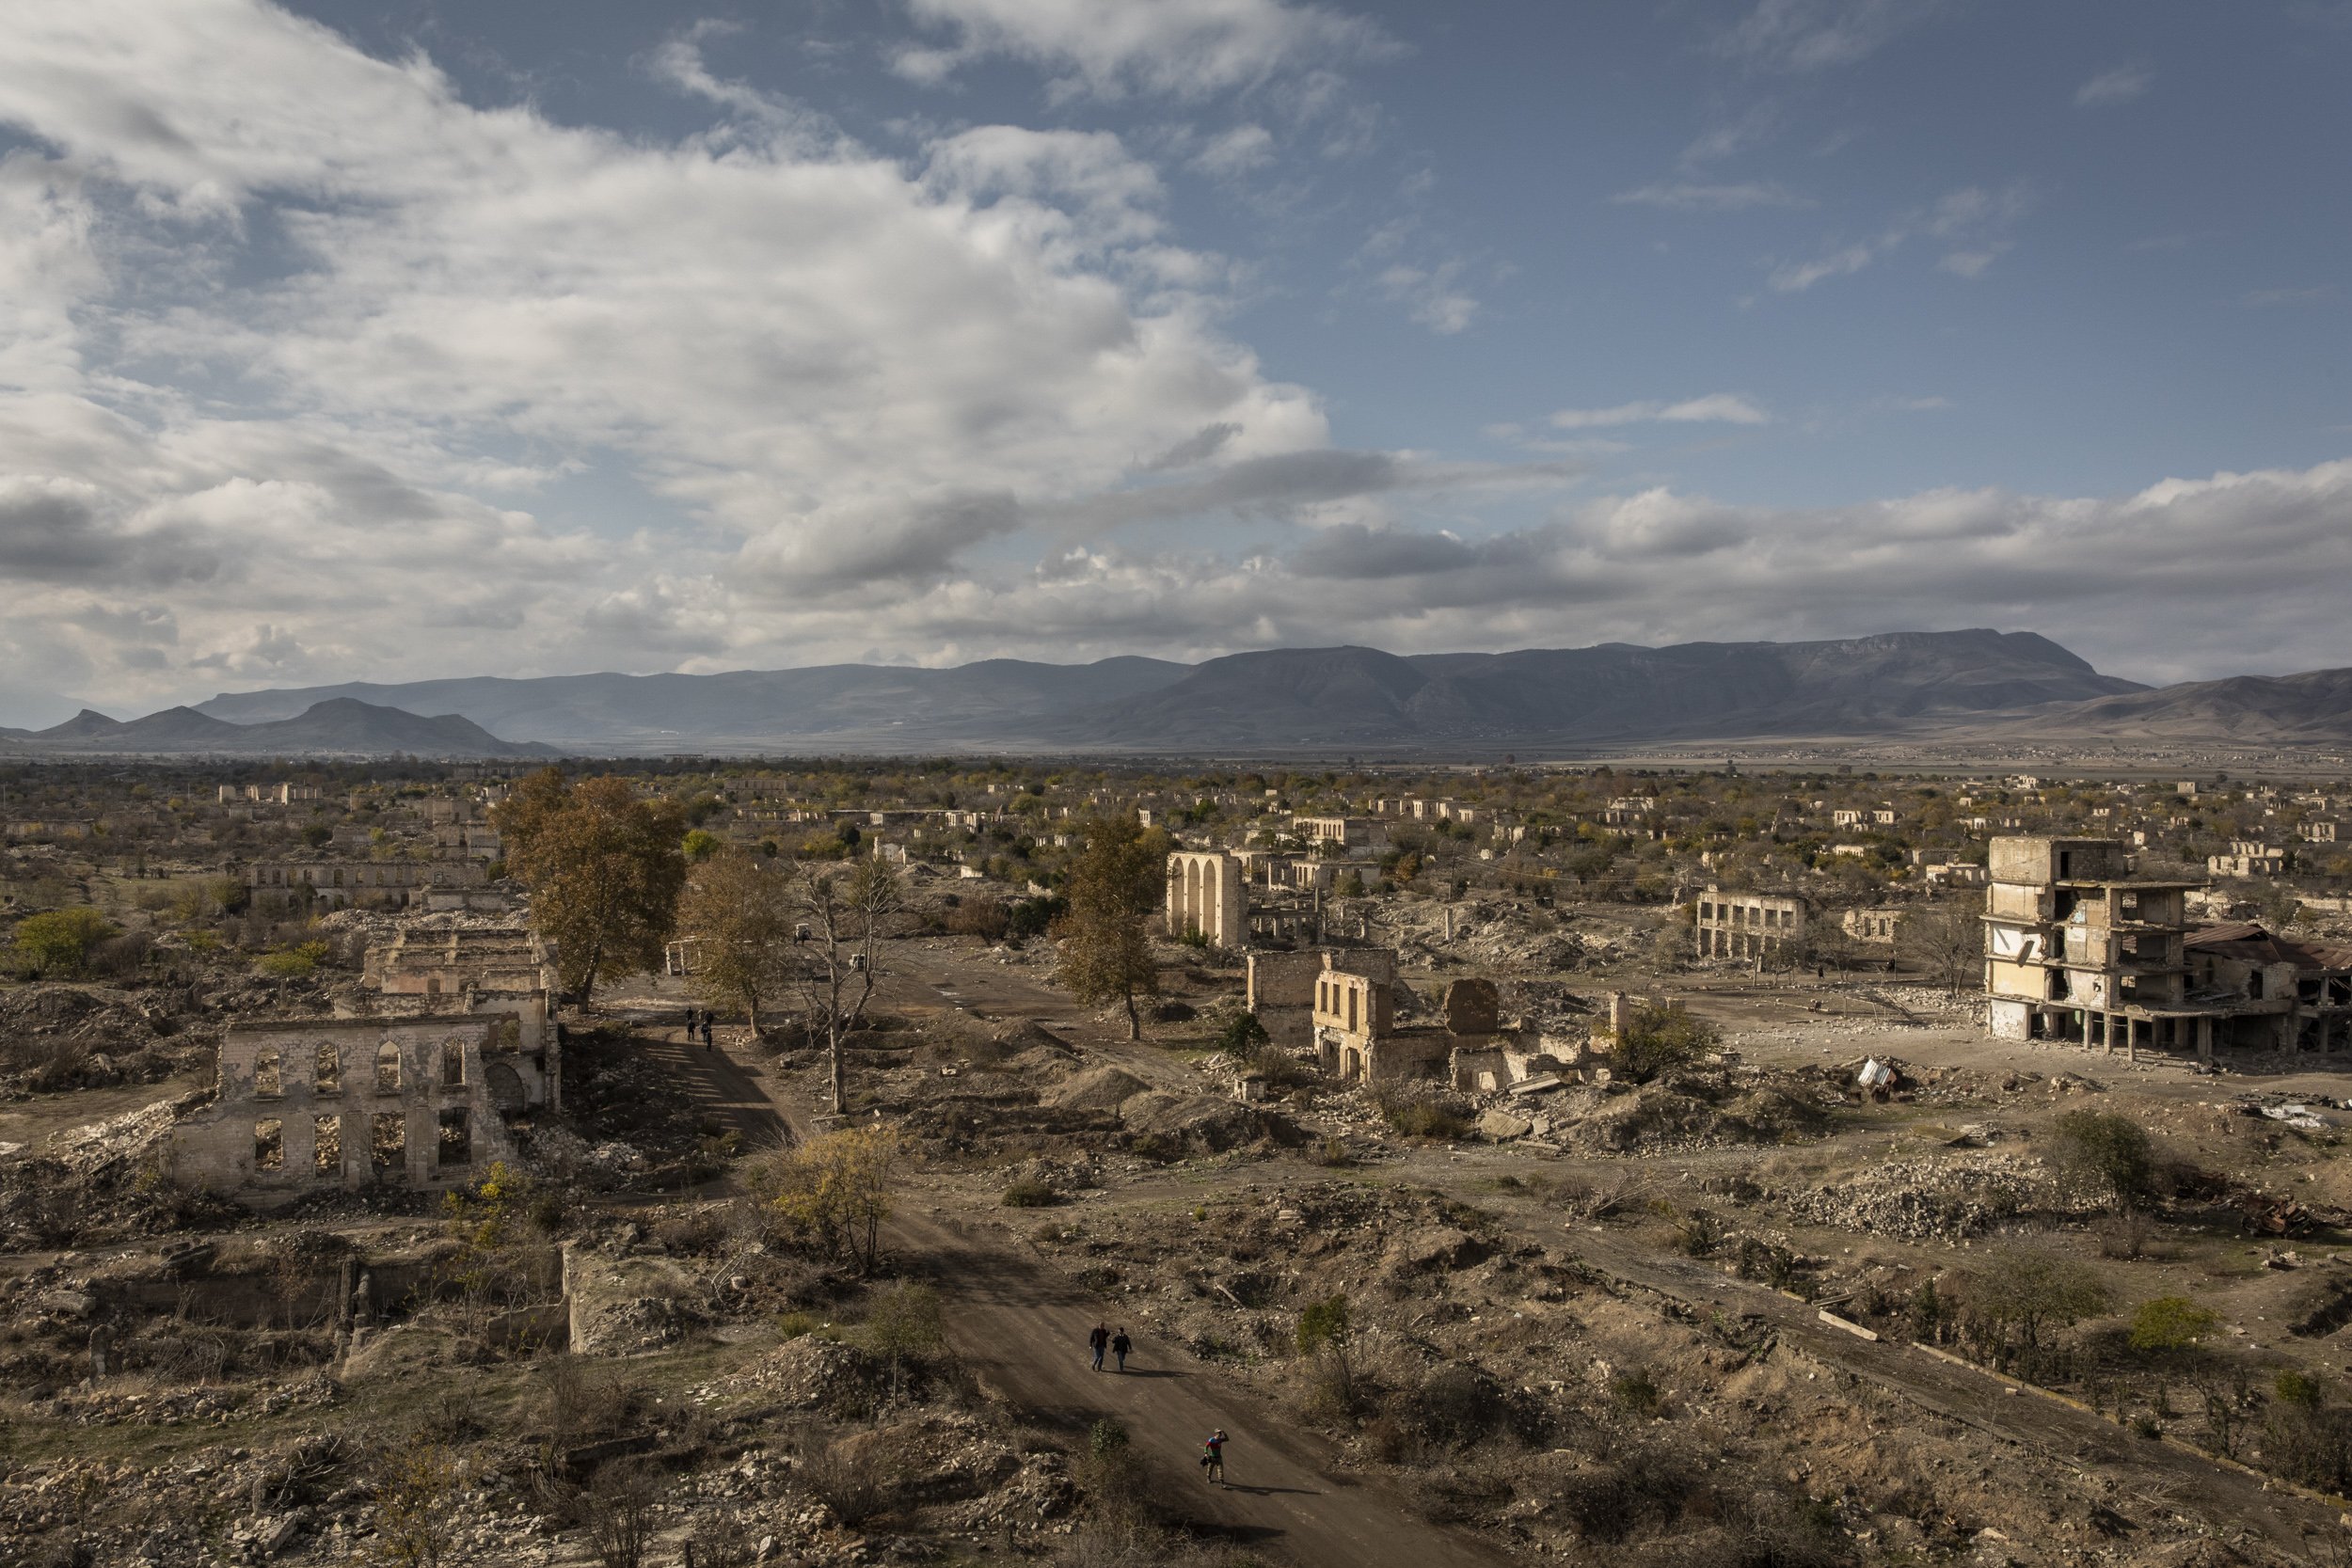  The city of Agdam lay in ruins after nearly 30 years under the control of Armenian forces. Originally home to around 40,000 people the city was captured by Armenia in the first Karabakh war in the early 90’s. The entire population fled the city and 